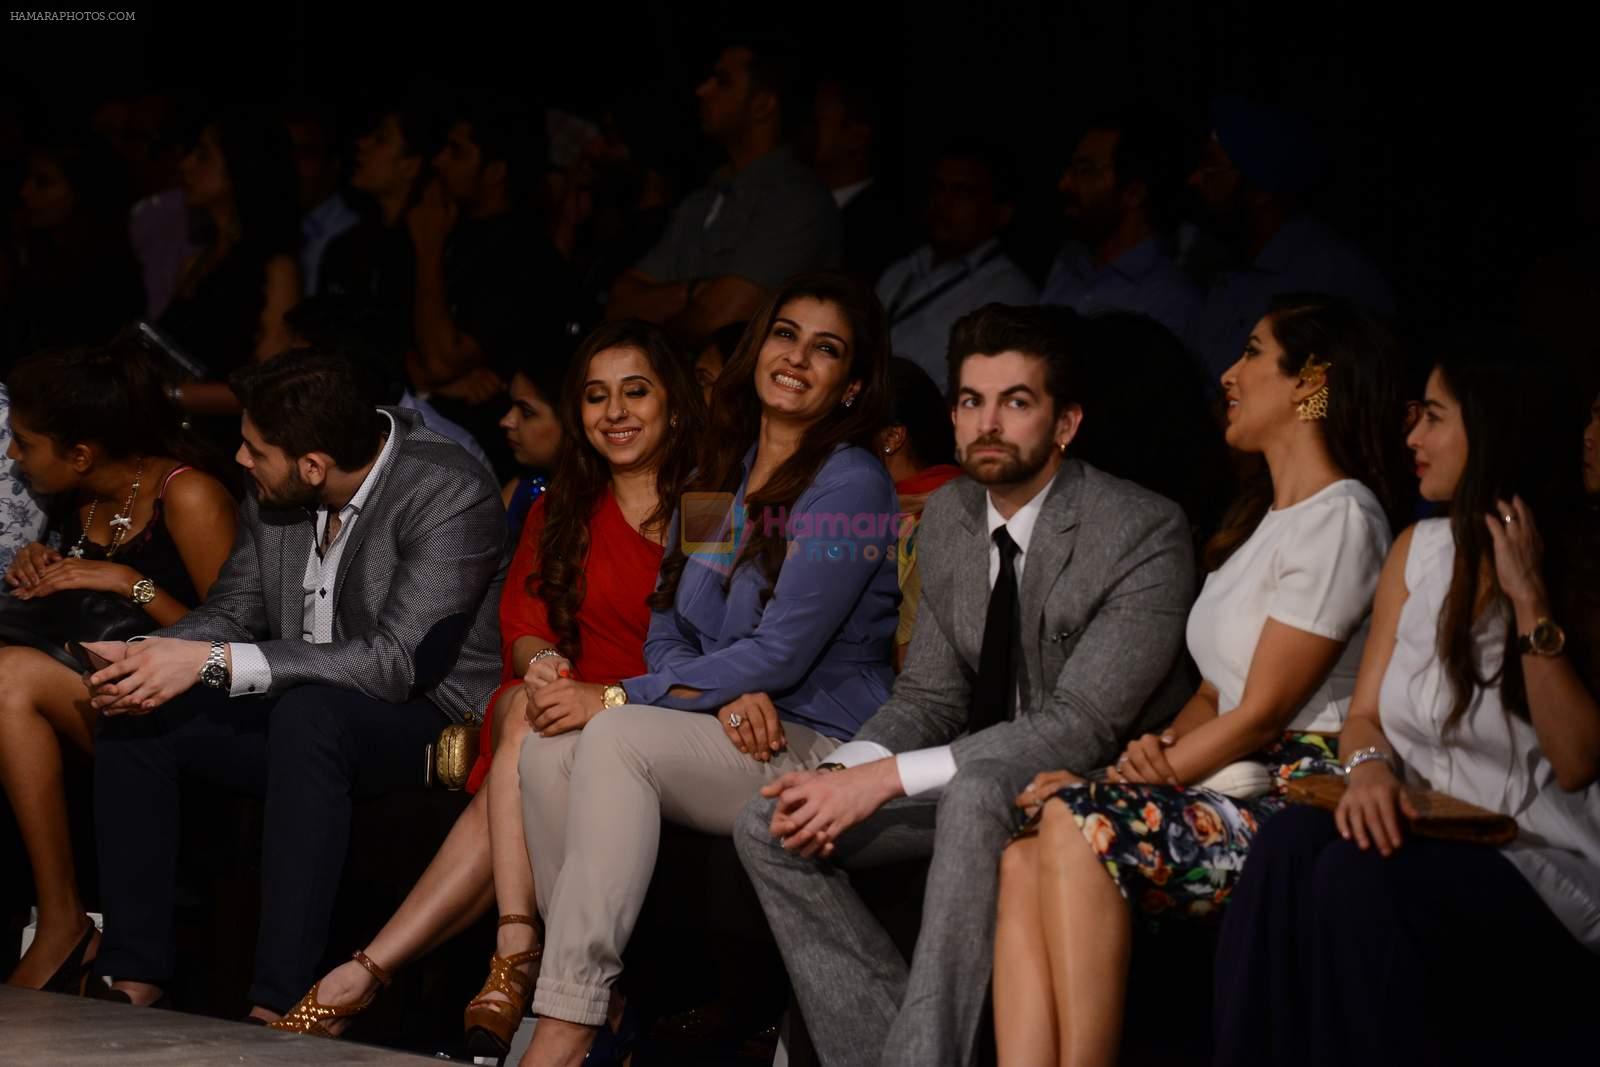 Raveena Tandon, Neil Mukesh, Sophie Chaudhary at Manav Gangwani Show at India Couture Week 2015 Day 5 on 1st Aug 2015